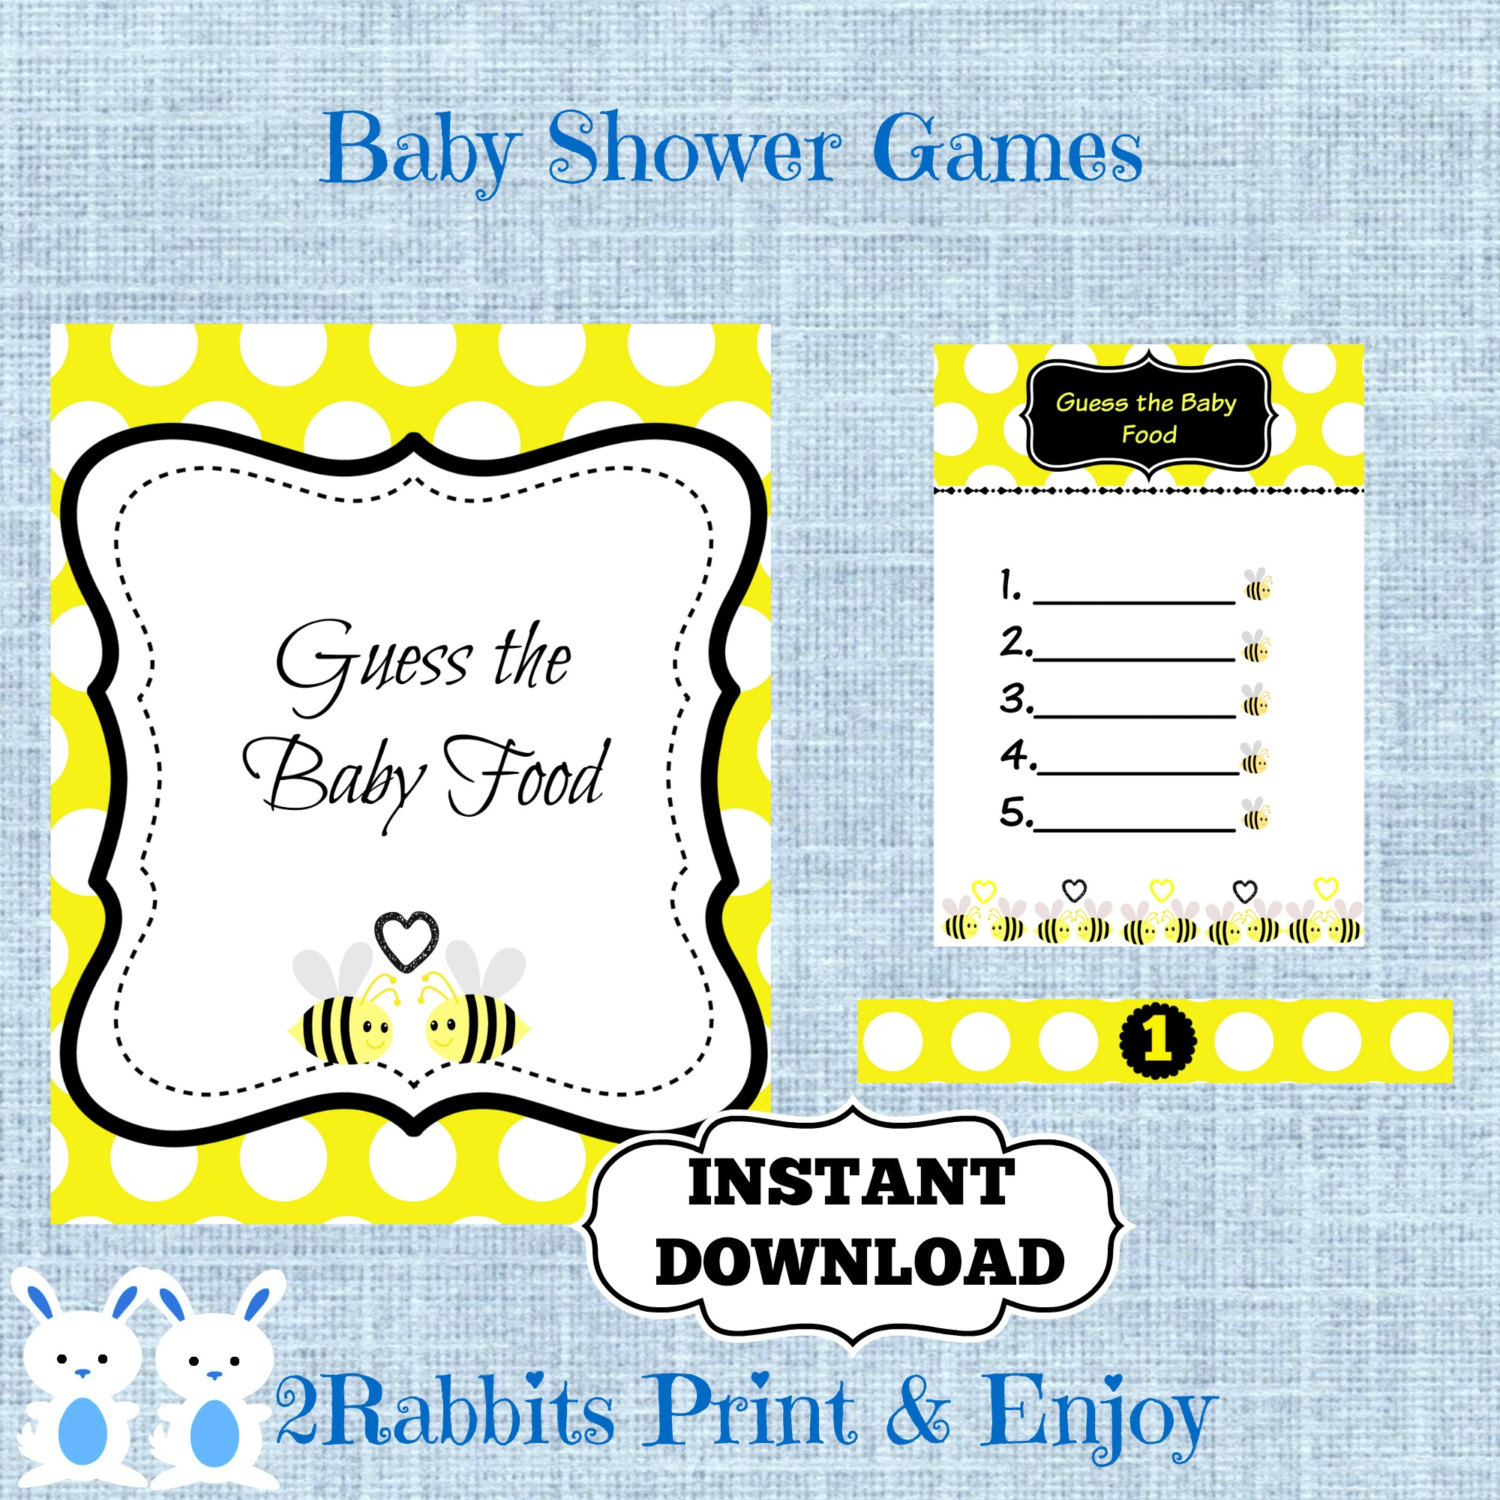 baby shower games clipart - photo #46